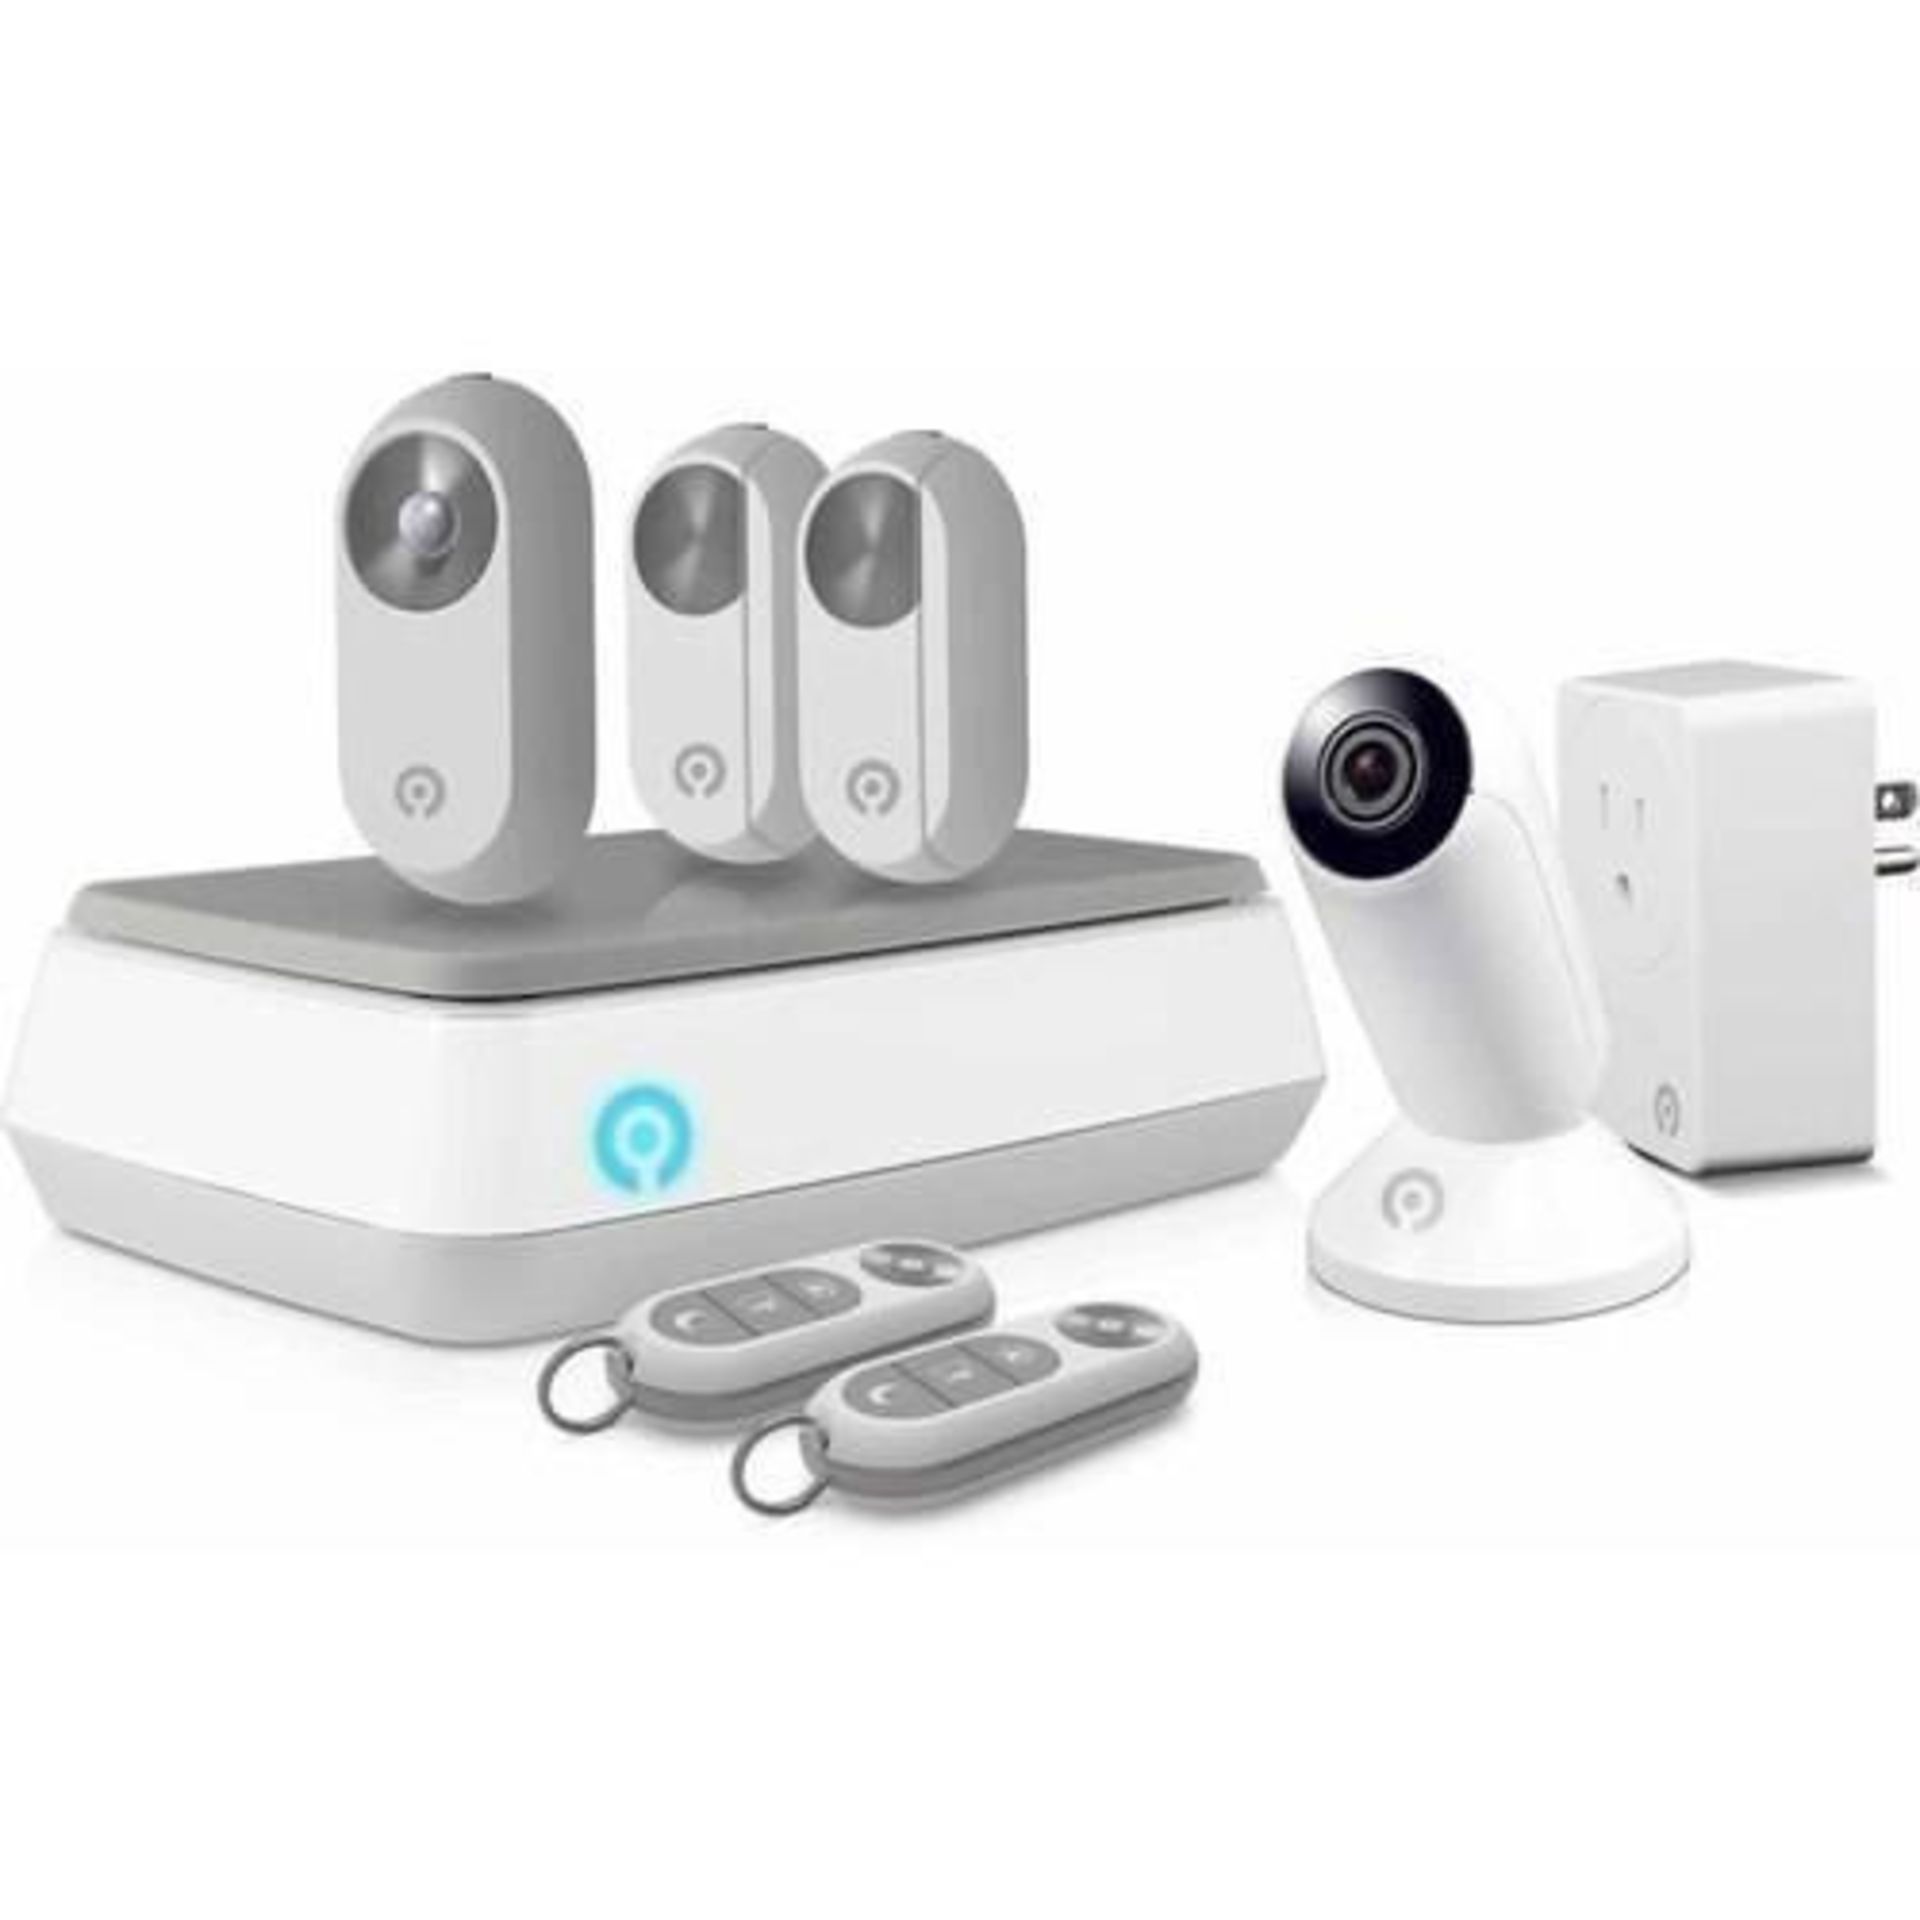 V Grade A Swann One Smart Home Control Kit - Includes SmannOne Smart Hub - Soundview Indoor Camera -